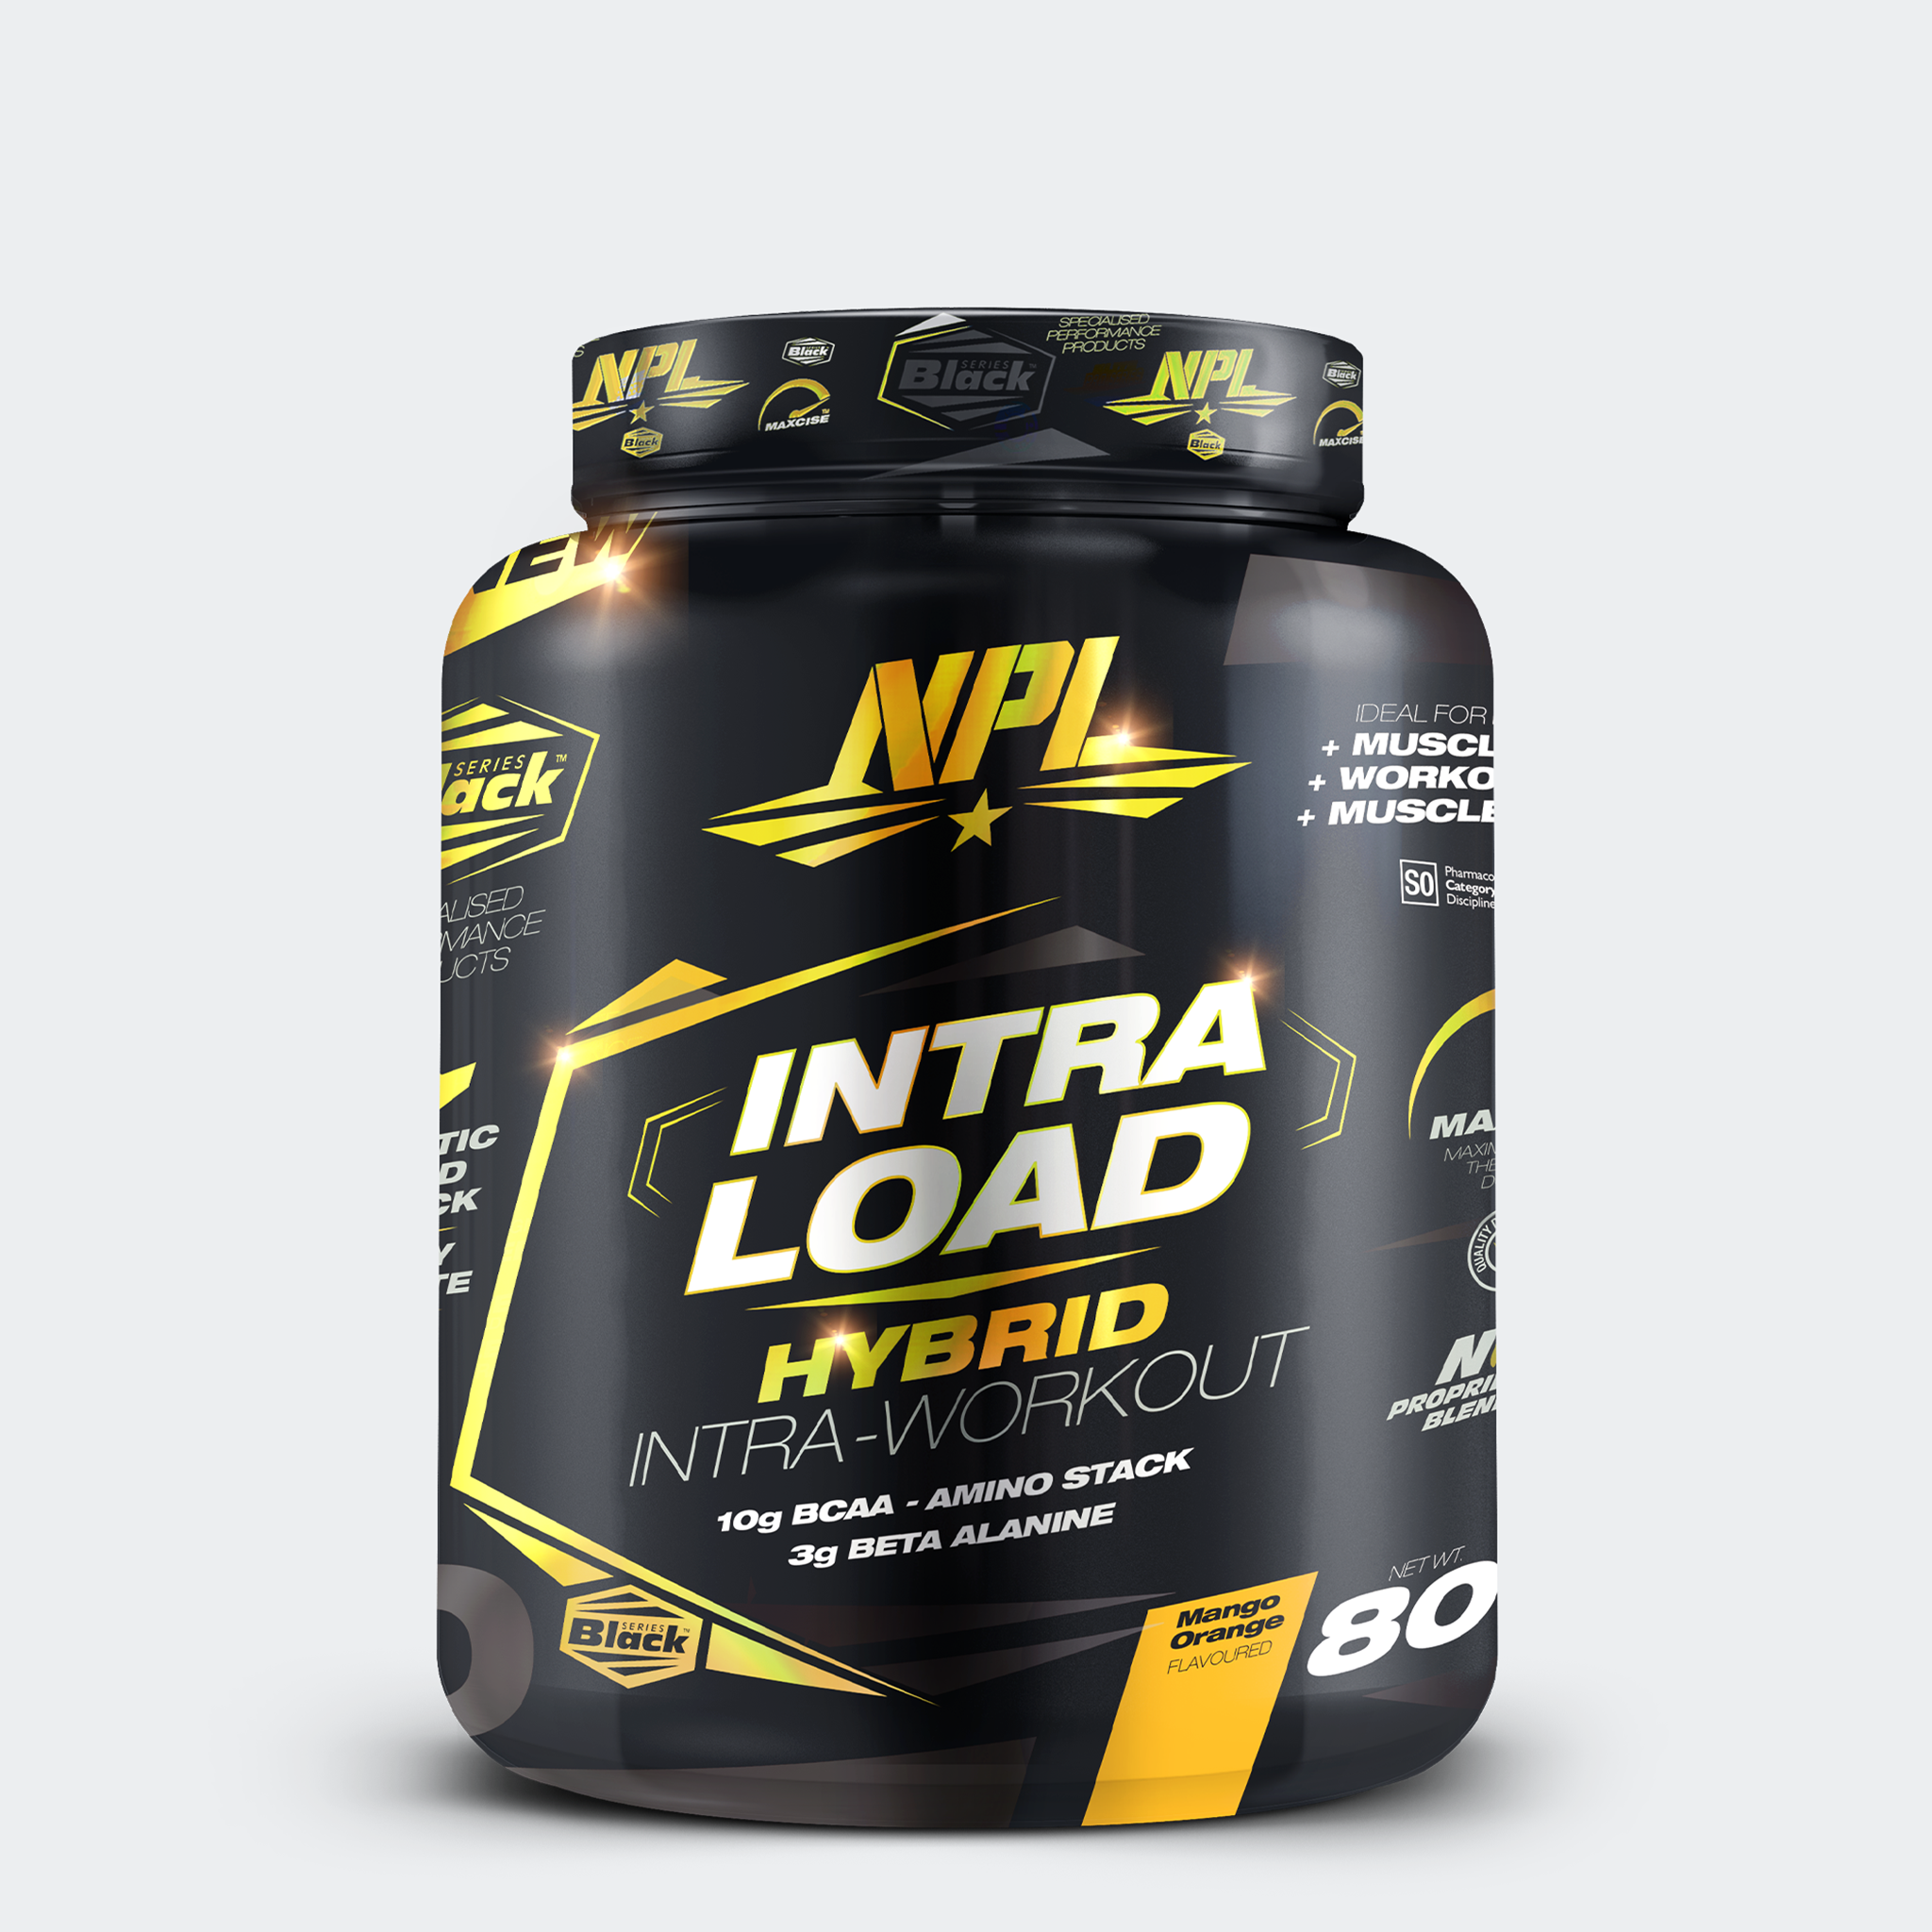 NPL Intraload intra-workout drink with added BCAA stack and beta alanine